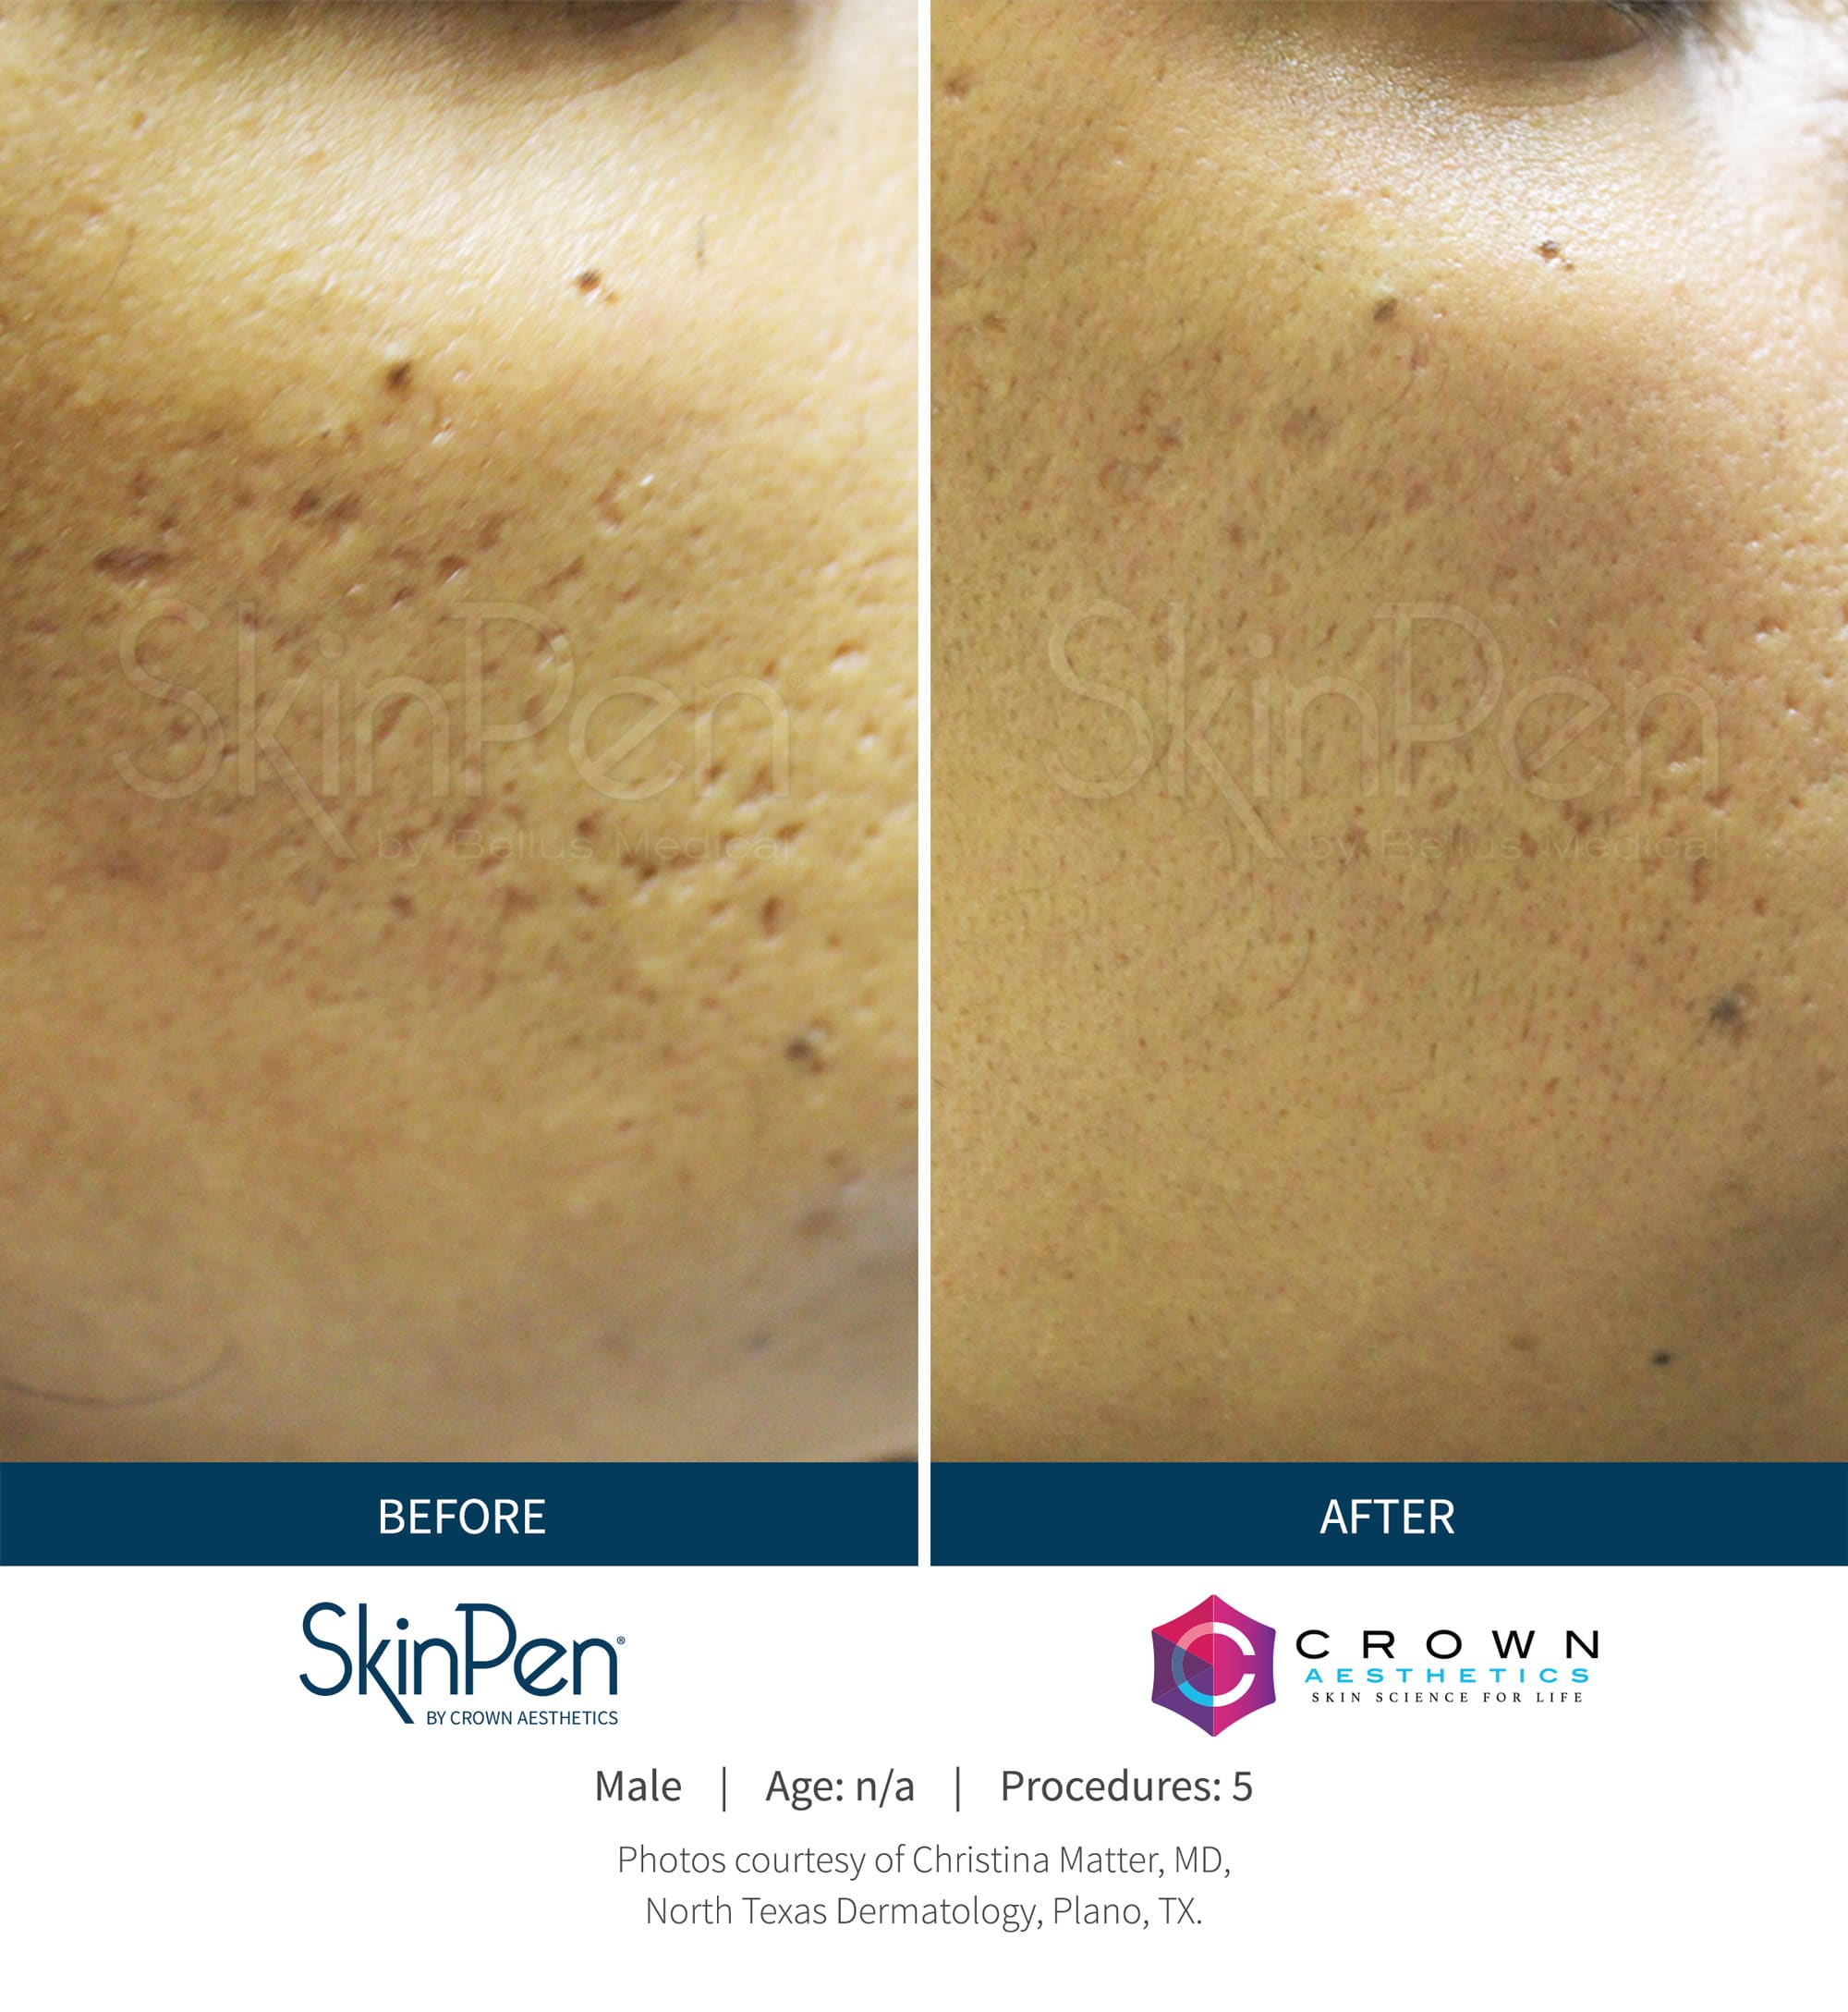 SkinPen used on patient for microneedling